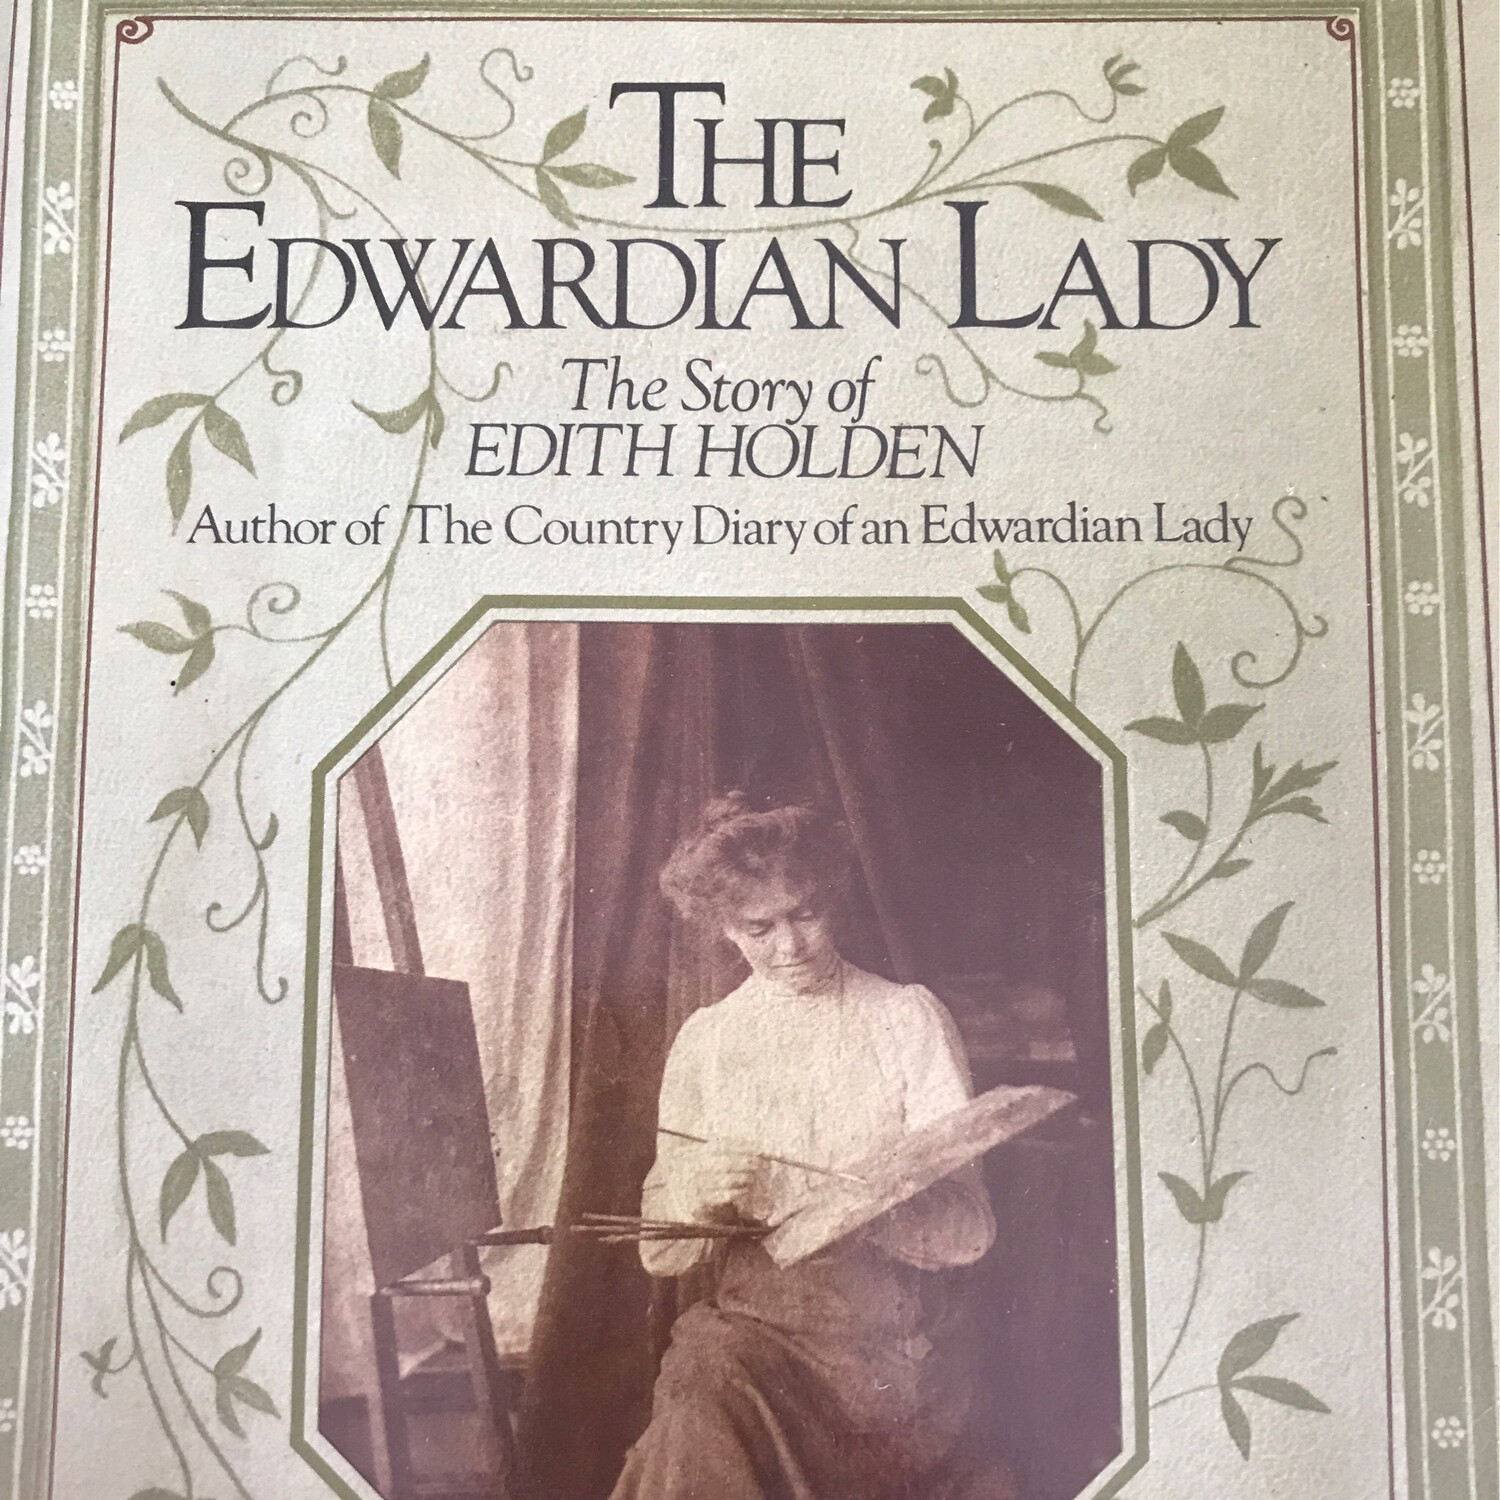 The Edwardian Lady, The Story Of Edith Holden, Ina Taylor